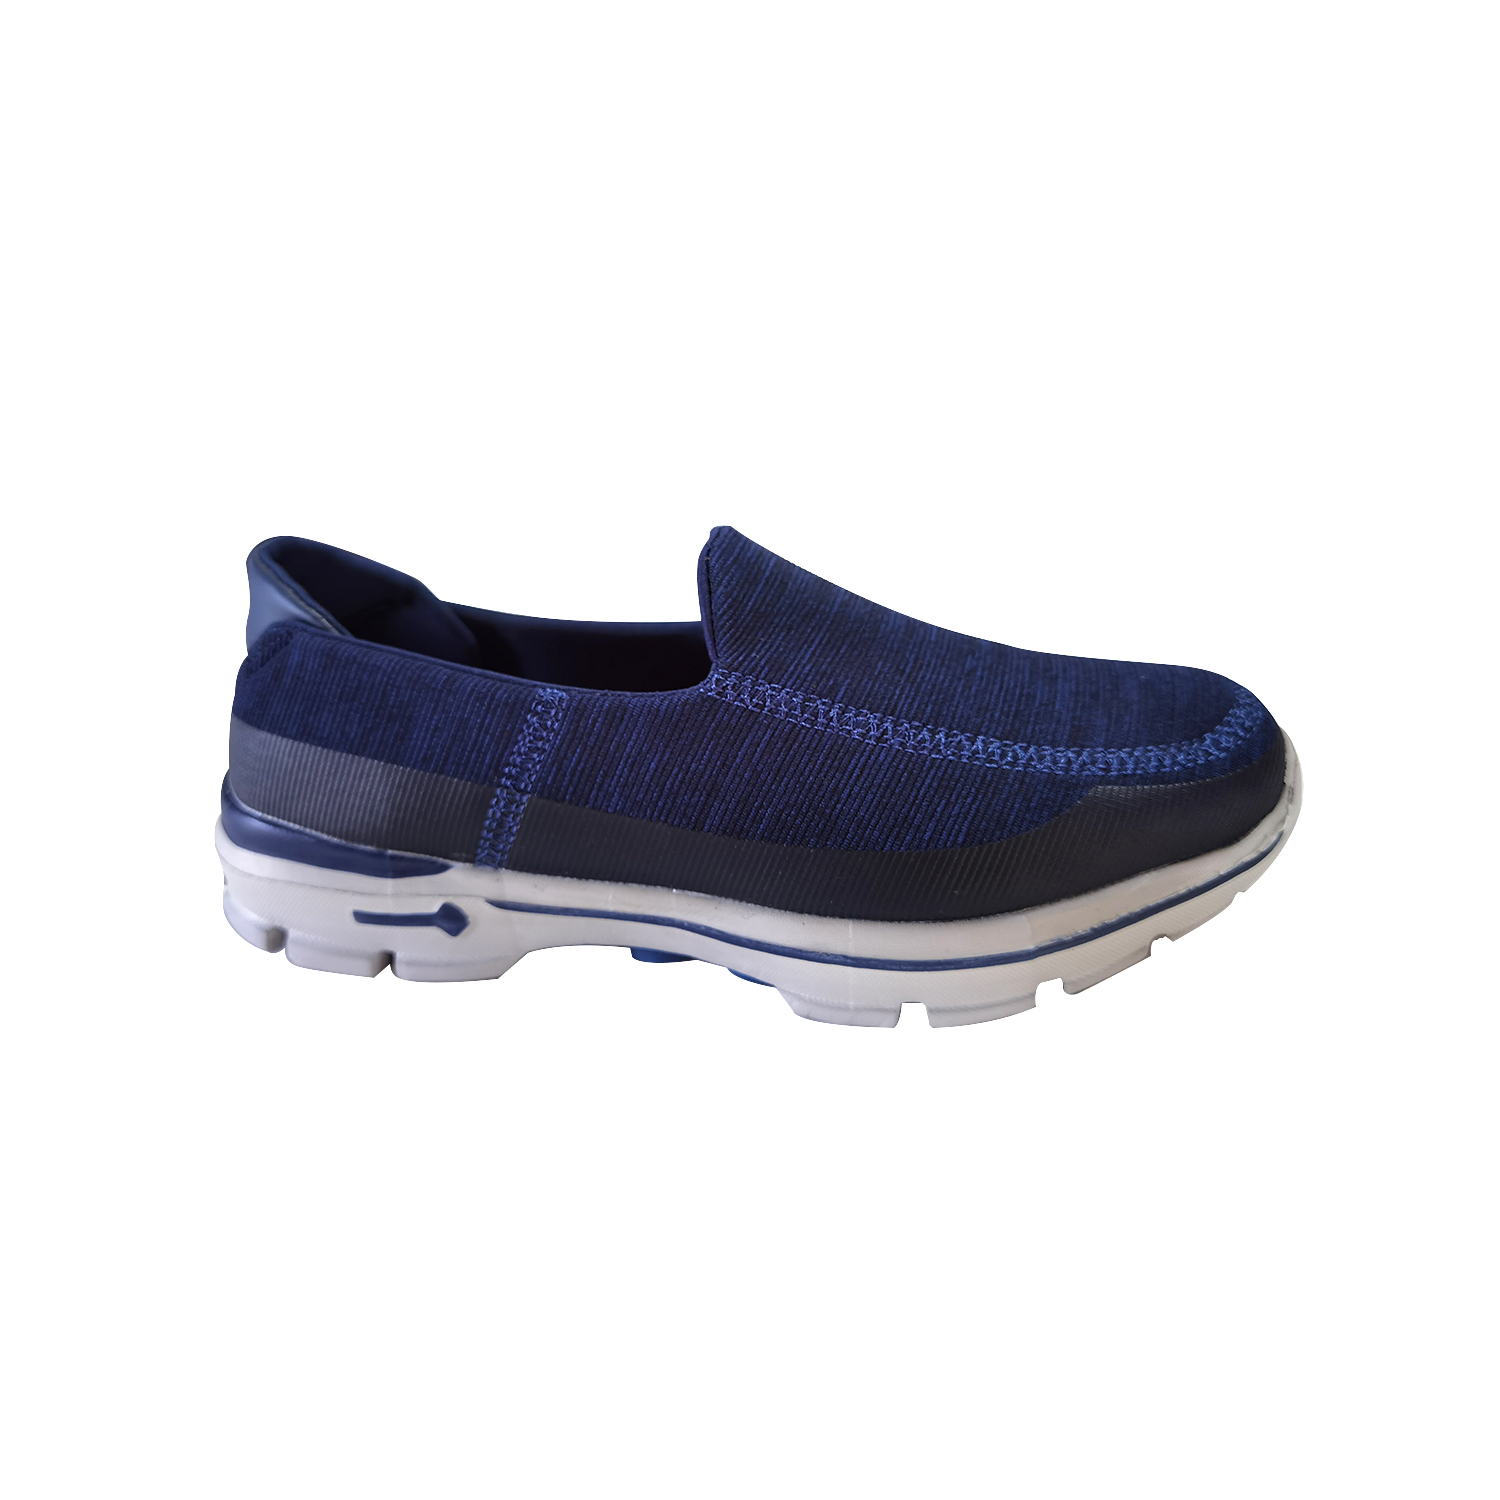 Men's Casual Shoes Slip On Loafers 